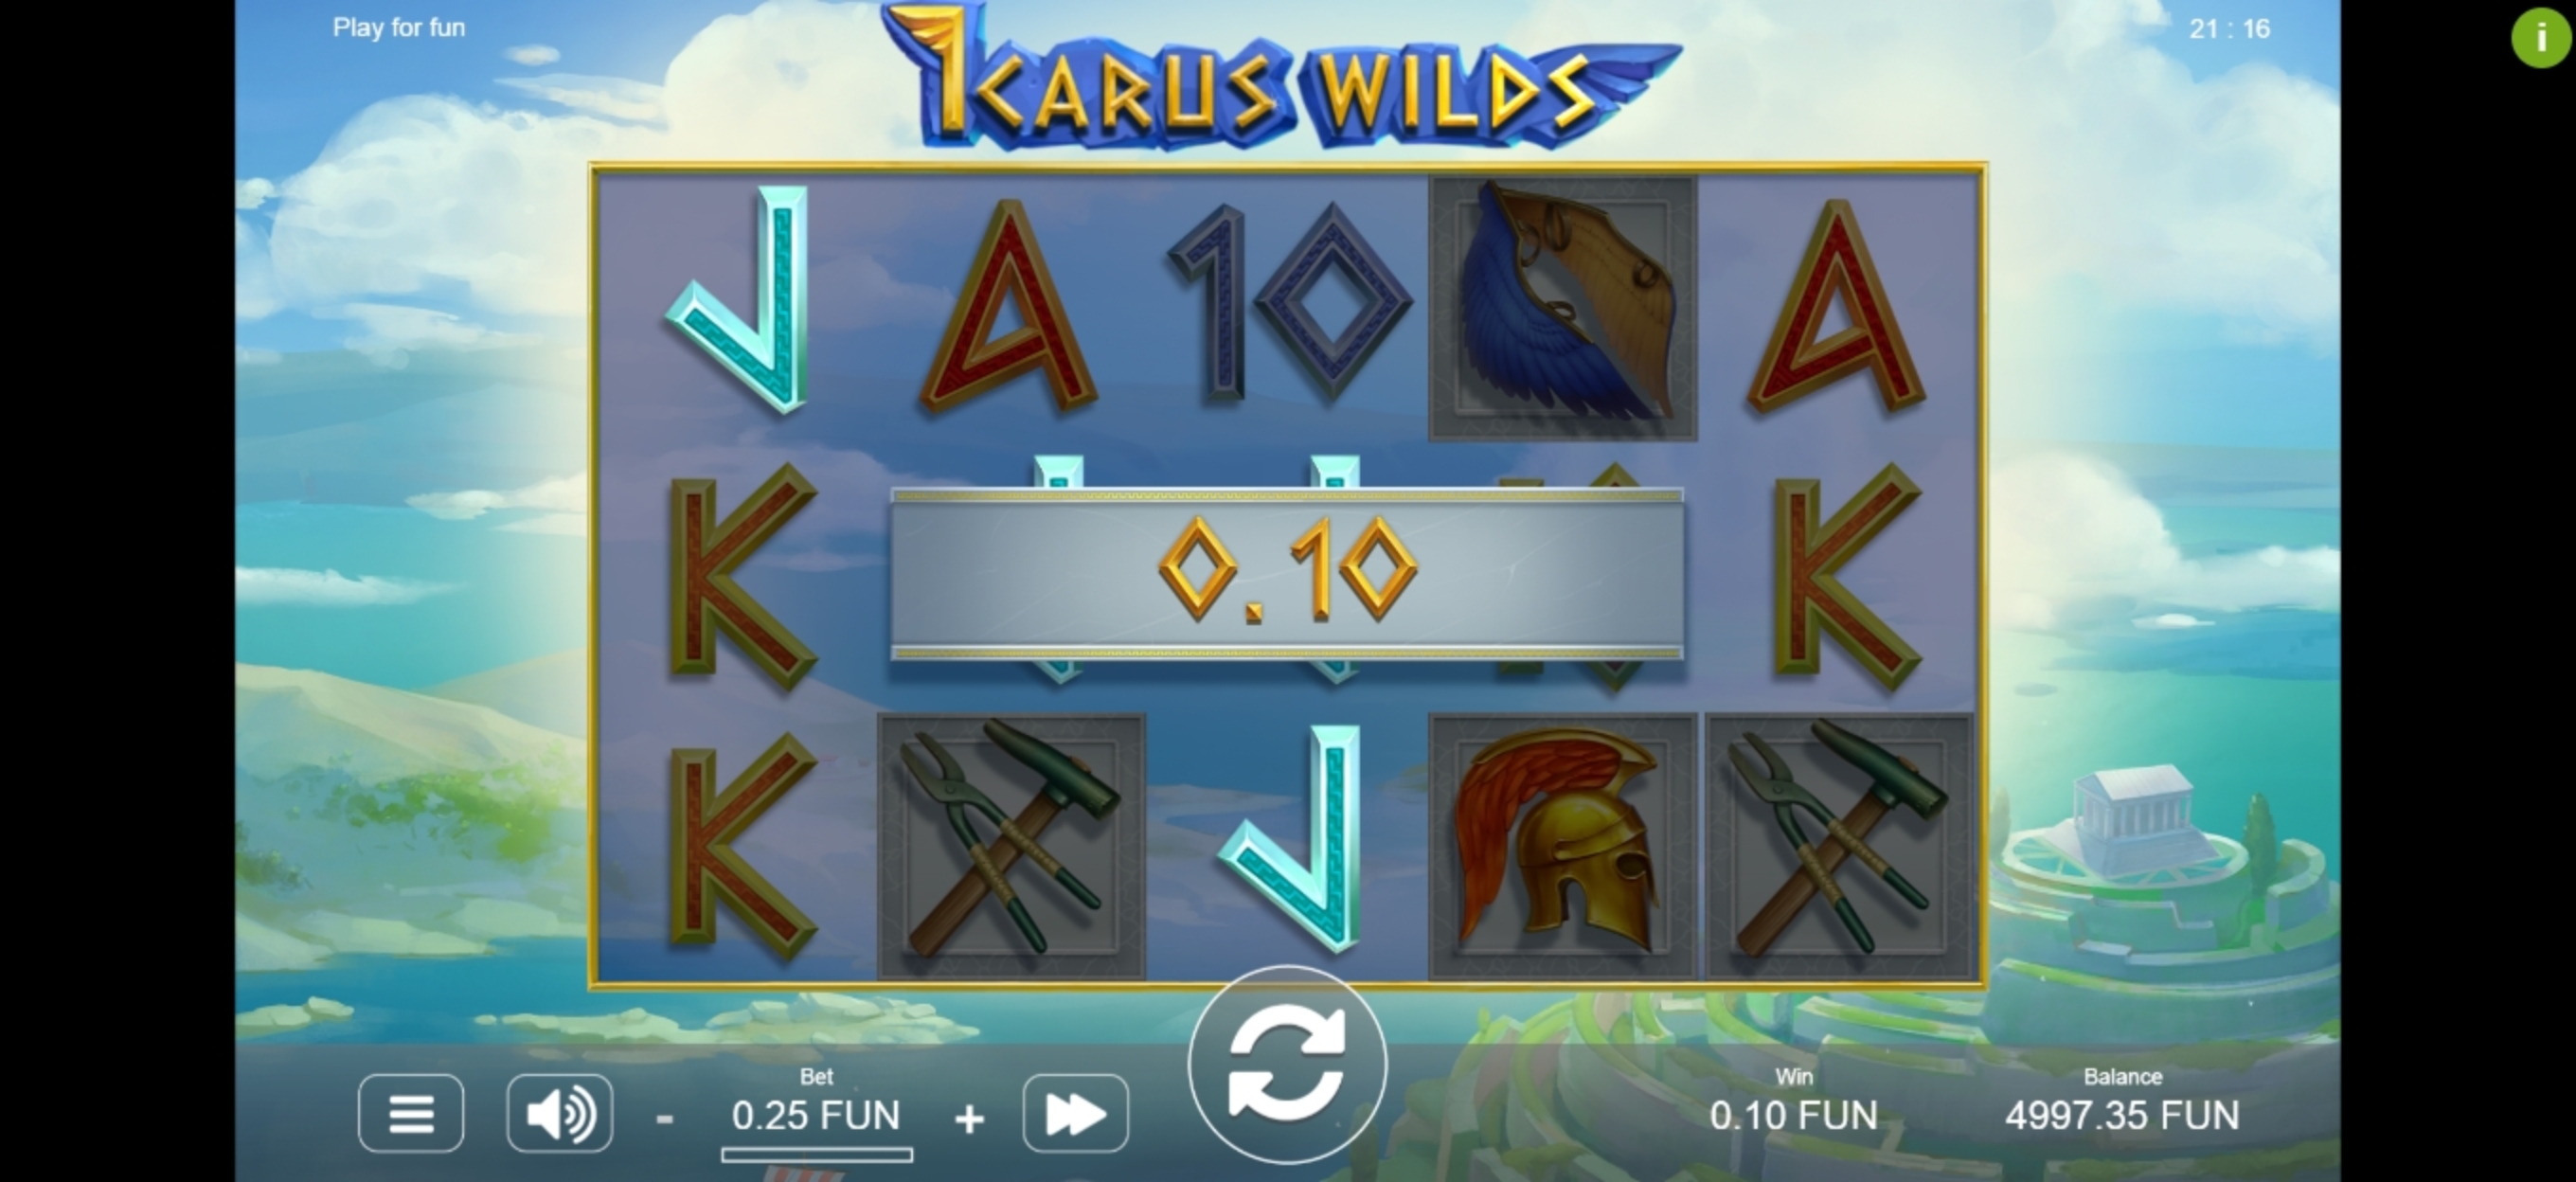 Win Money in Icarus Wilds Free Slot Game by STHLM Gaming